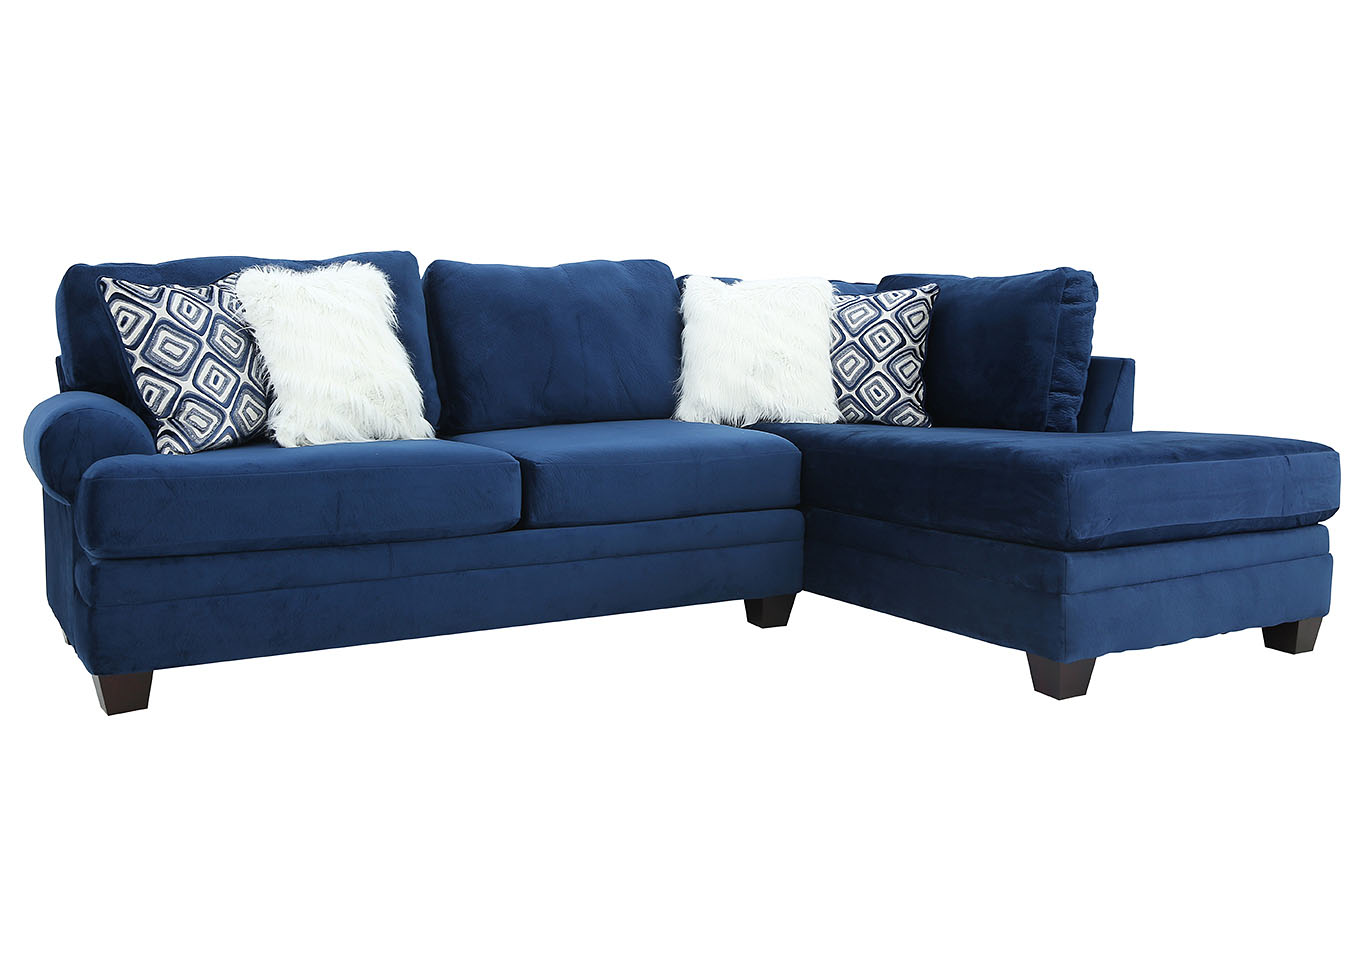 BRODIE GROOVY NAVY 2 PIECE SECTIONAL,ALBANY INDUSTRIES, INC.